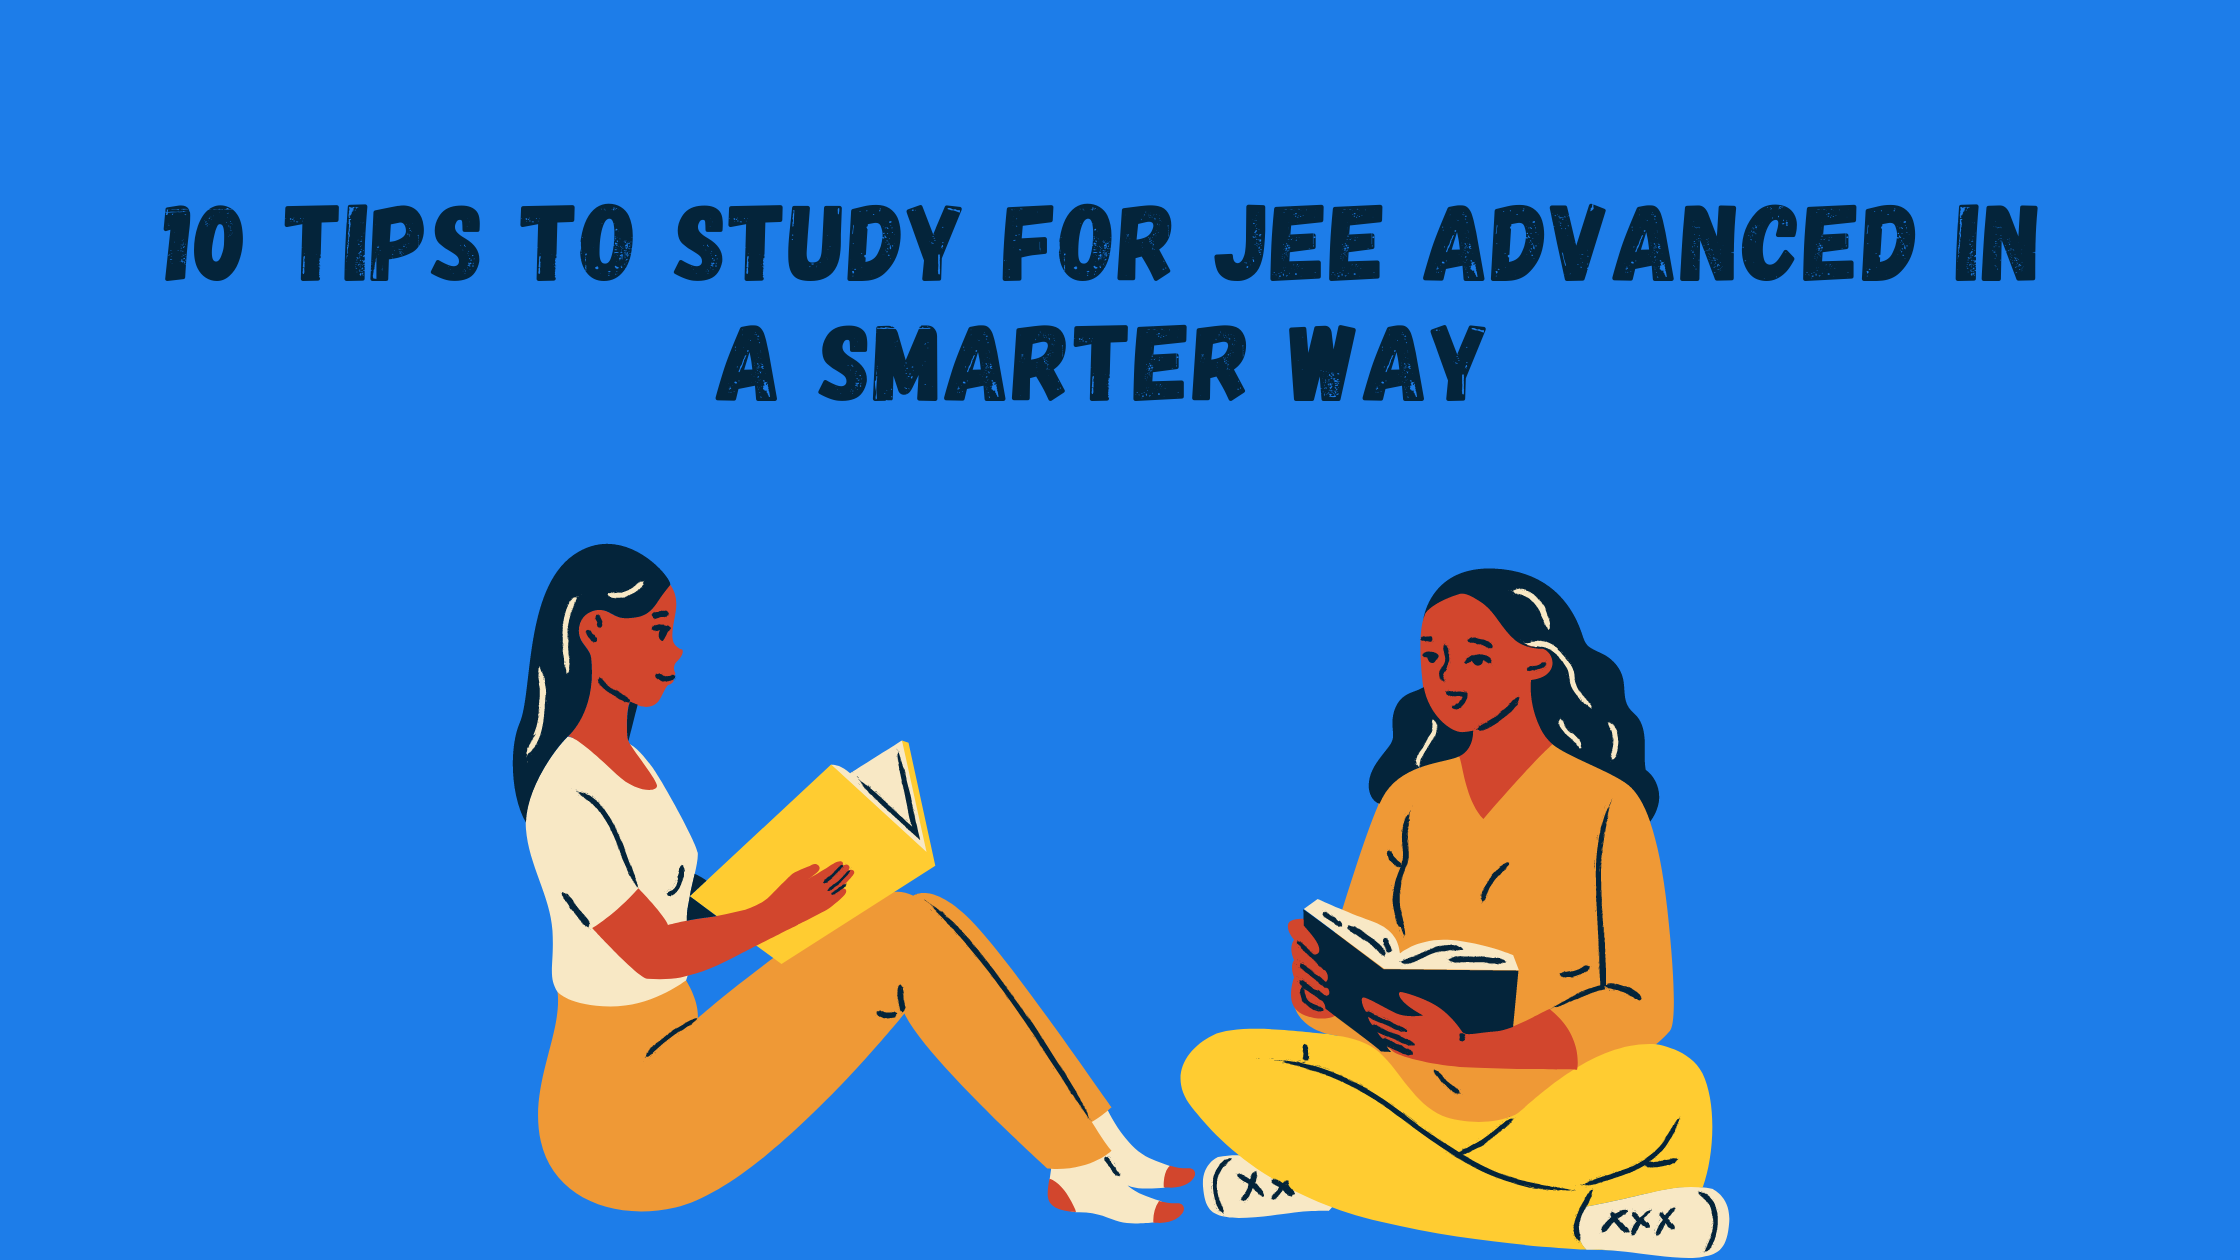 10 Tips to study for JEE Advanced